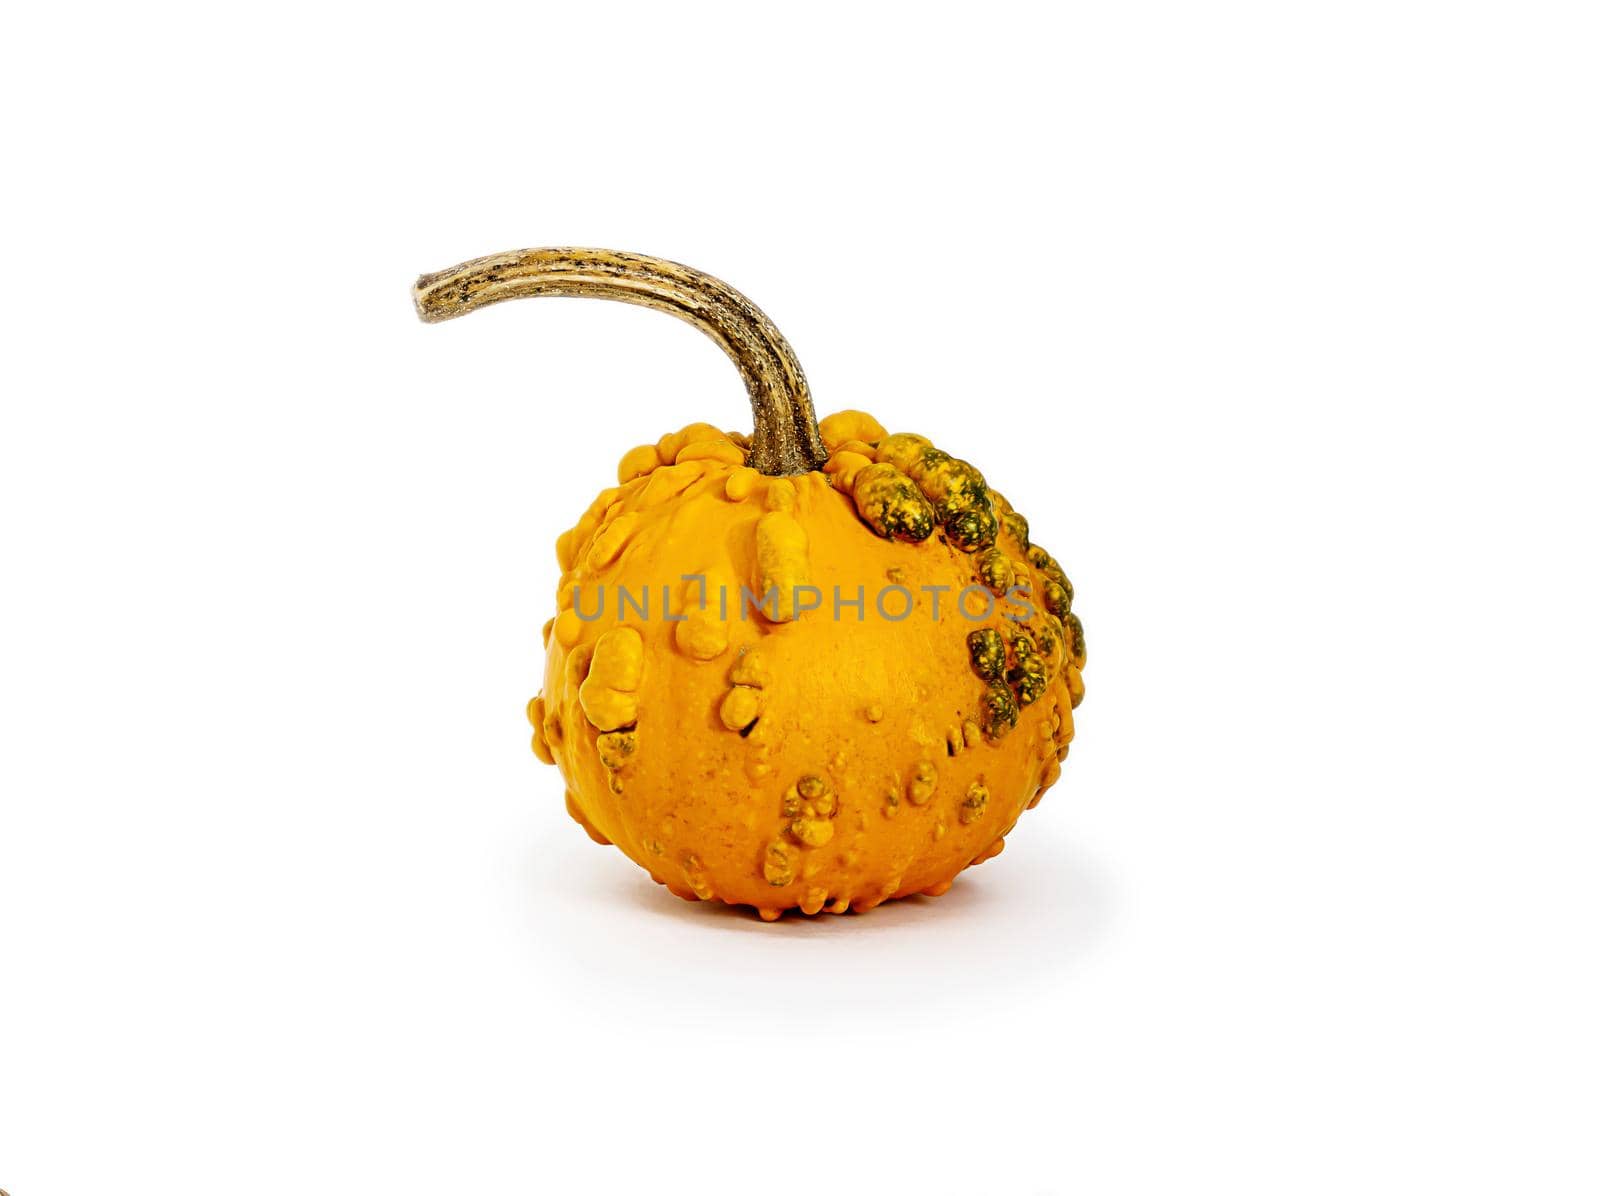 Close-up isolated object. Small decorative orange pumpkin on a white background. Cut object. The concept of autumn design, restaurant menu, Thanksgiving holiday and Halloween.